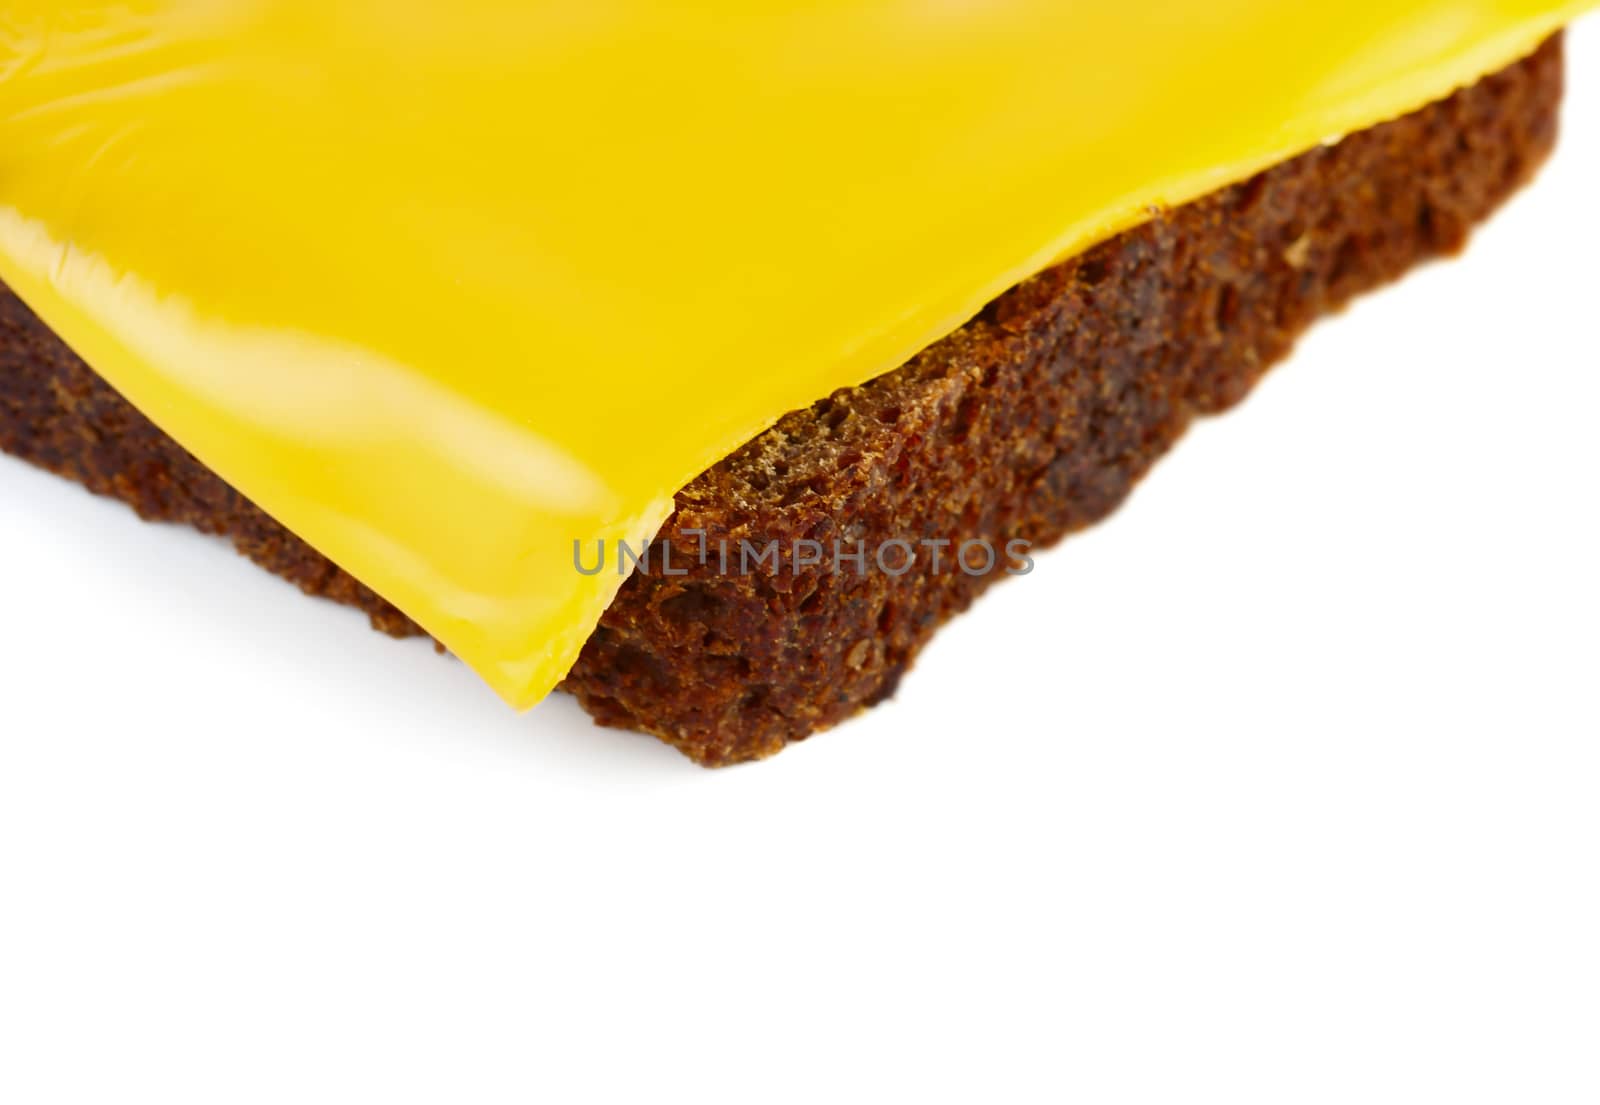 Clise up view of grilled cheese sandwich isolated on white background